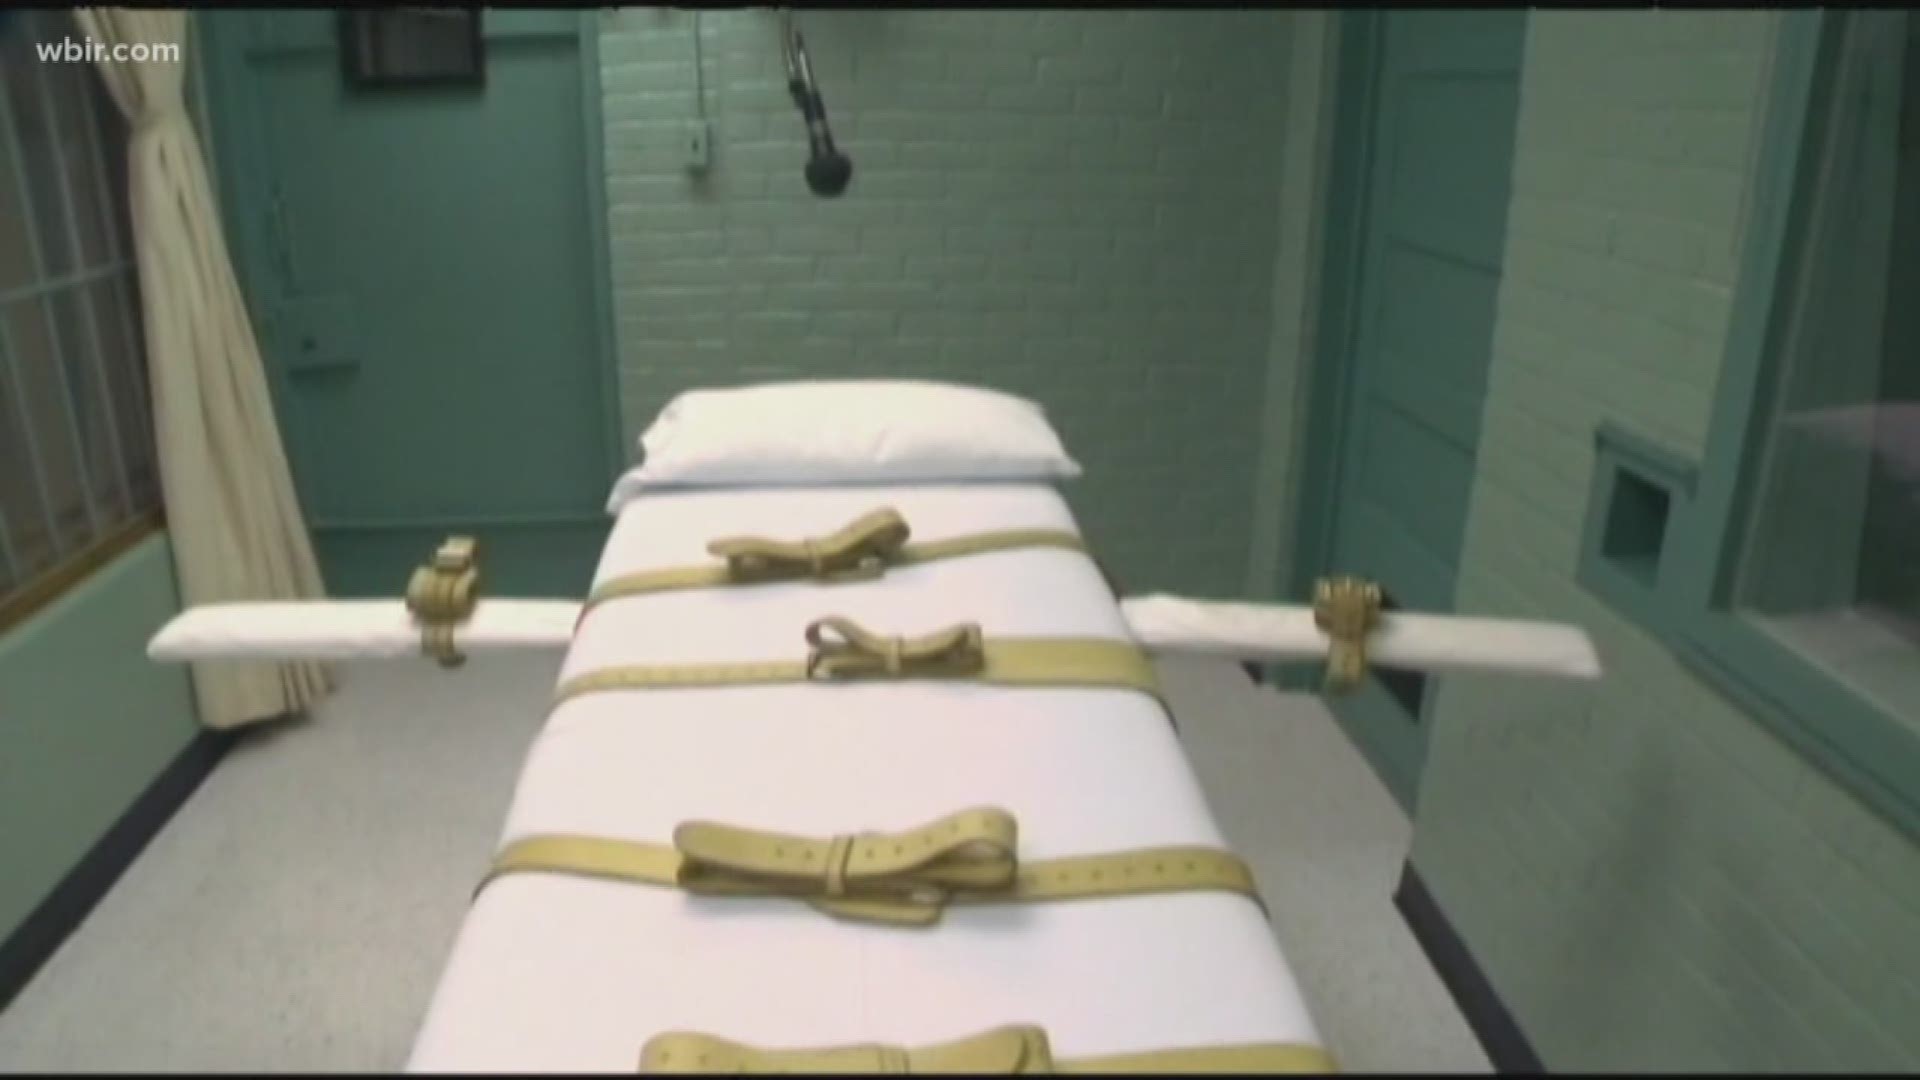 Prosecutors know that the death penalty doesn't come fast--it took more than 30 years for Billy Ray Irick to enter the execution chamber.